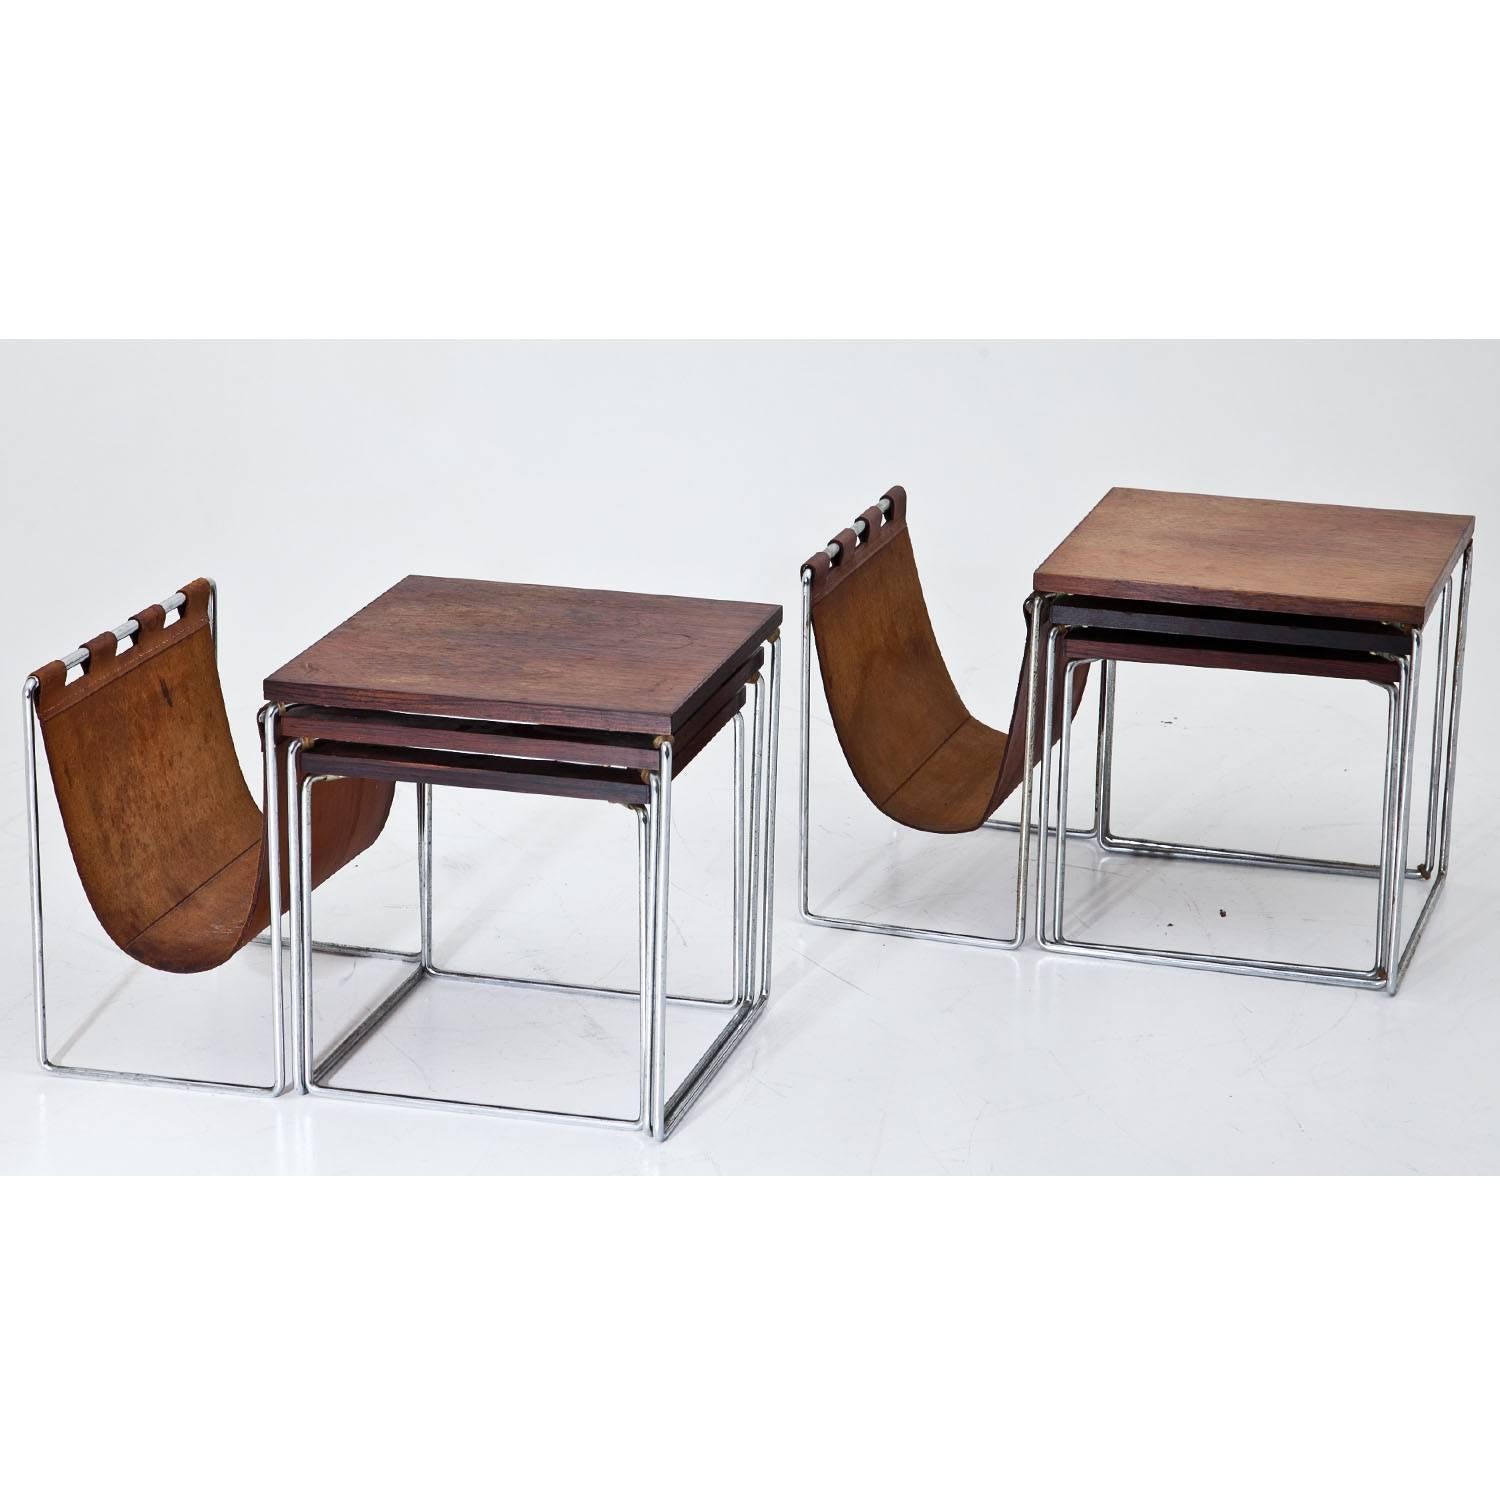 Pair of nesting tables with two smaller tables each and a magazine rack out of brown leather. Each table has a square table top and stands on bent steel feet. The smaller tables have the following 
measurements (H x W x D):
33 x 32 x 32 cm & 31 x